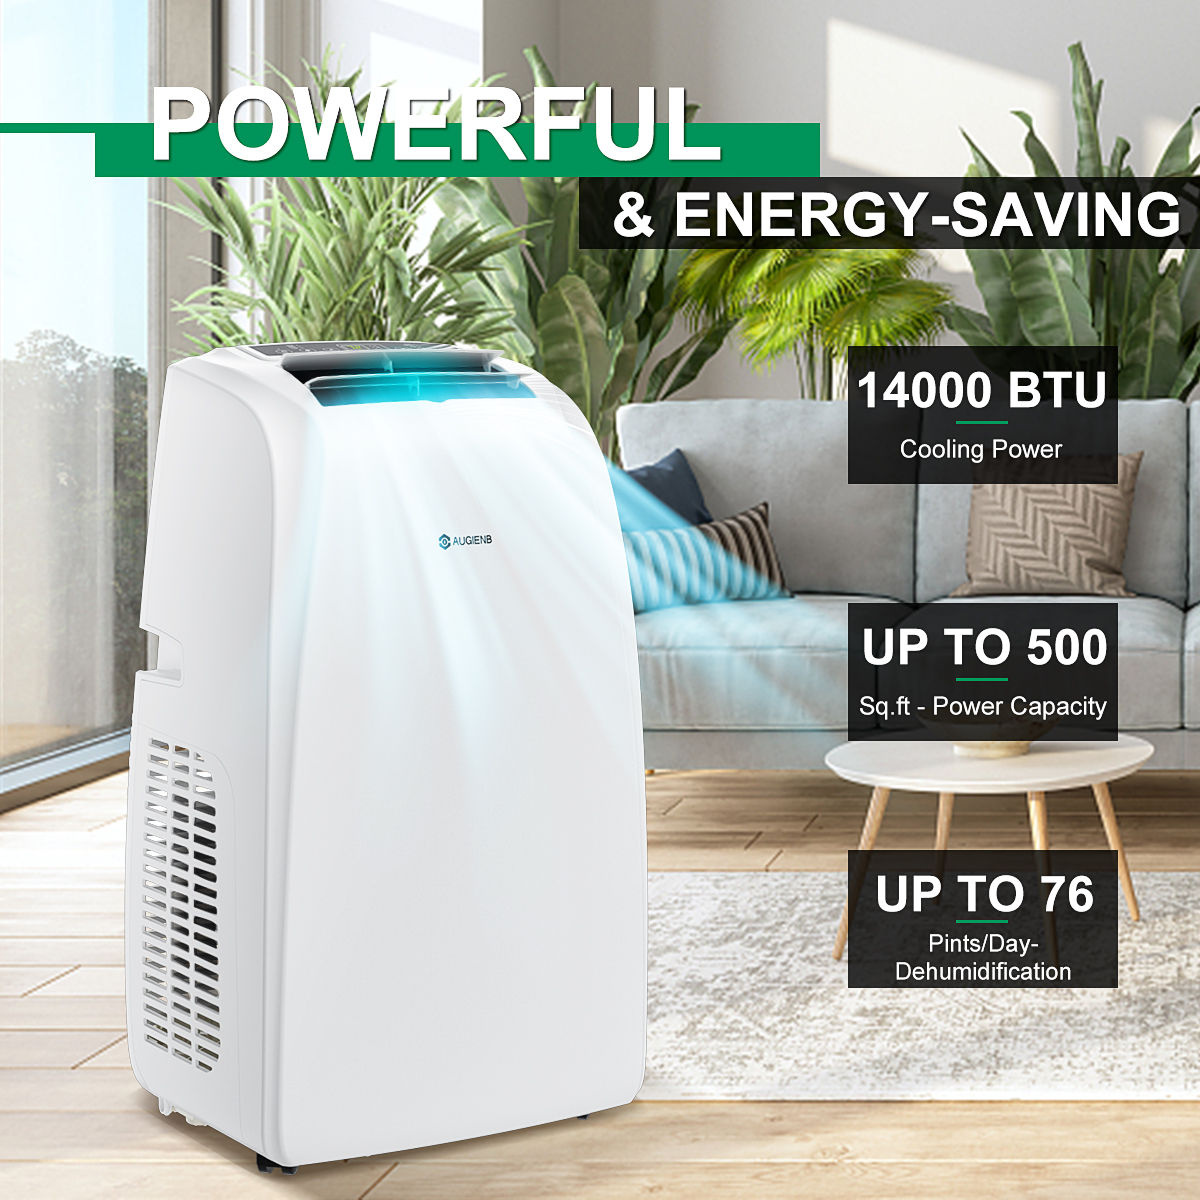 AUGIENB 14000 BTU Portable Air Conditioner,Evaporative Air Cooler ,Dehumidifier Cooling Fan 24-Hour Timer,Cooling Up to 500 Sq, W/ Remote Control &Window Kit - image 2 of 10